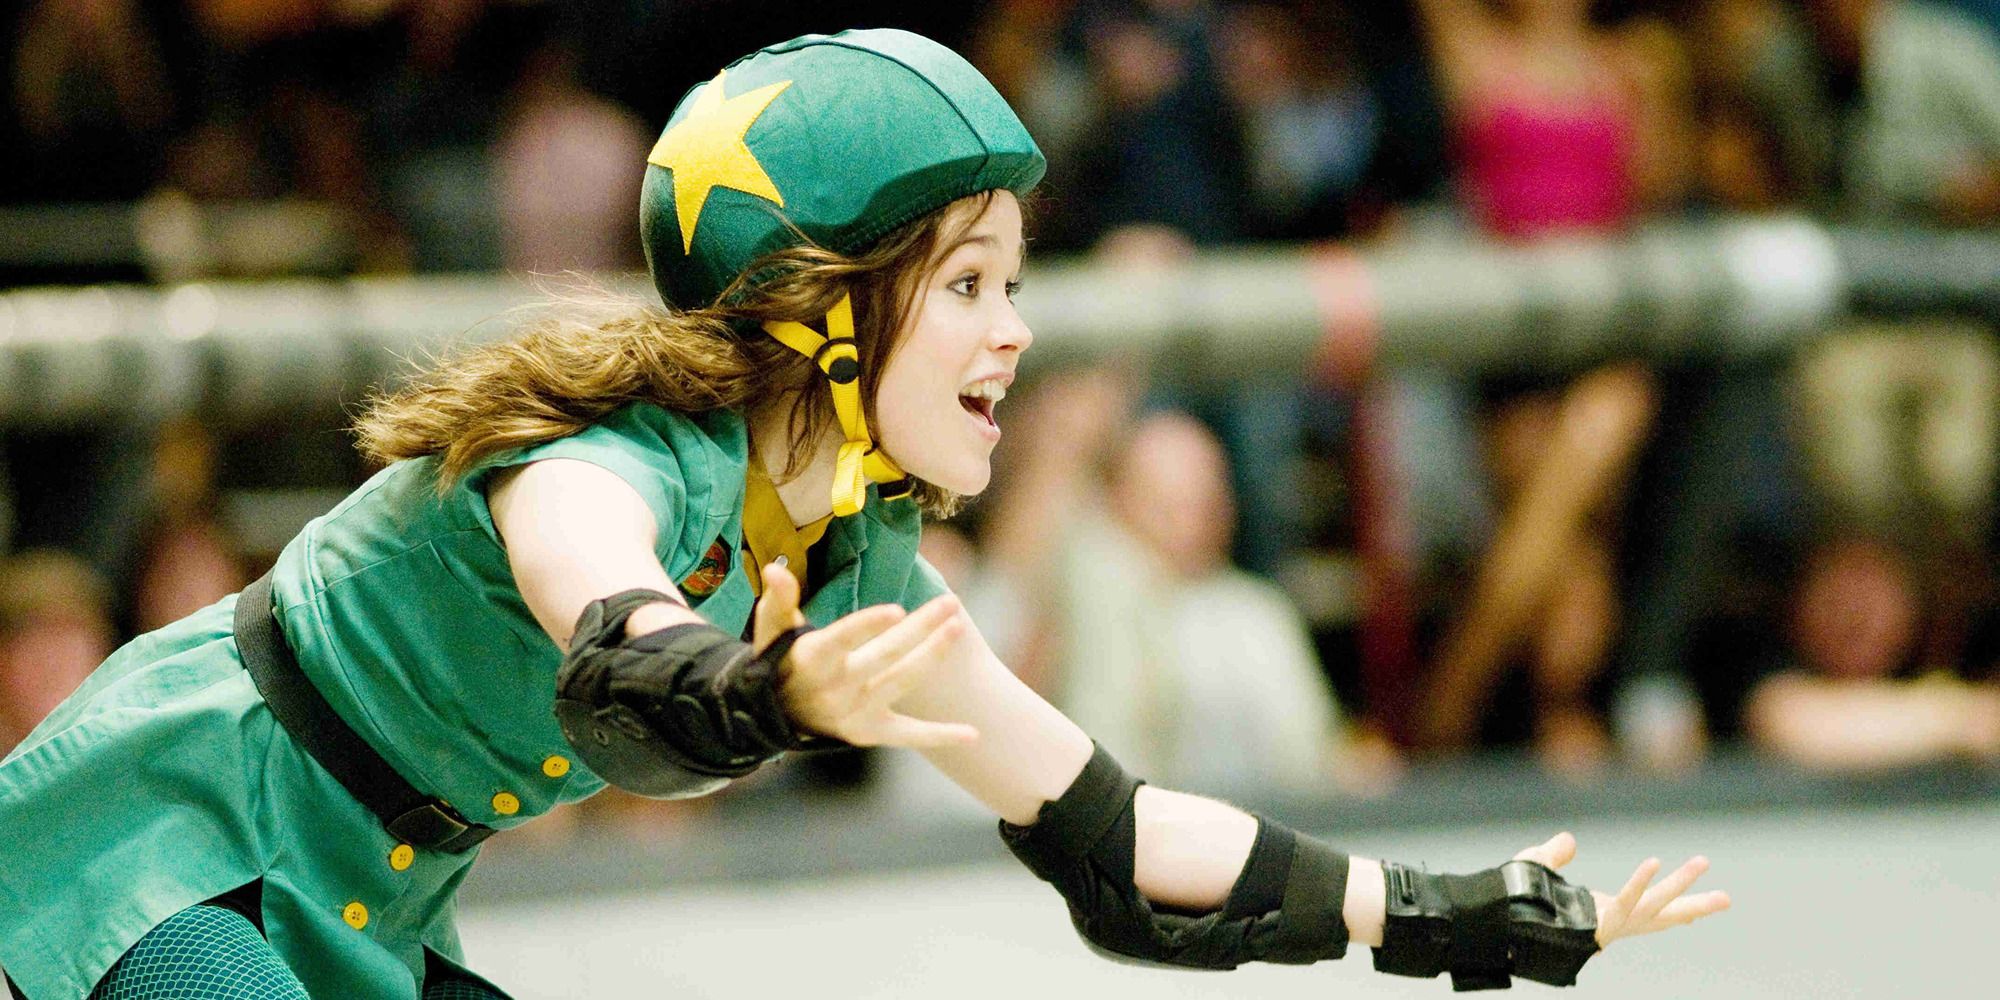 Elliot Page rollerskating with a green uniform